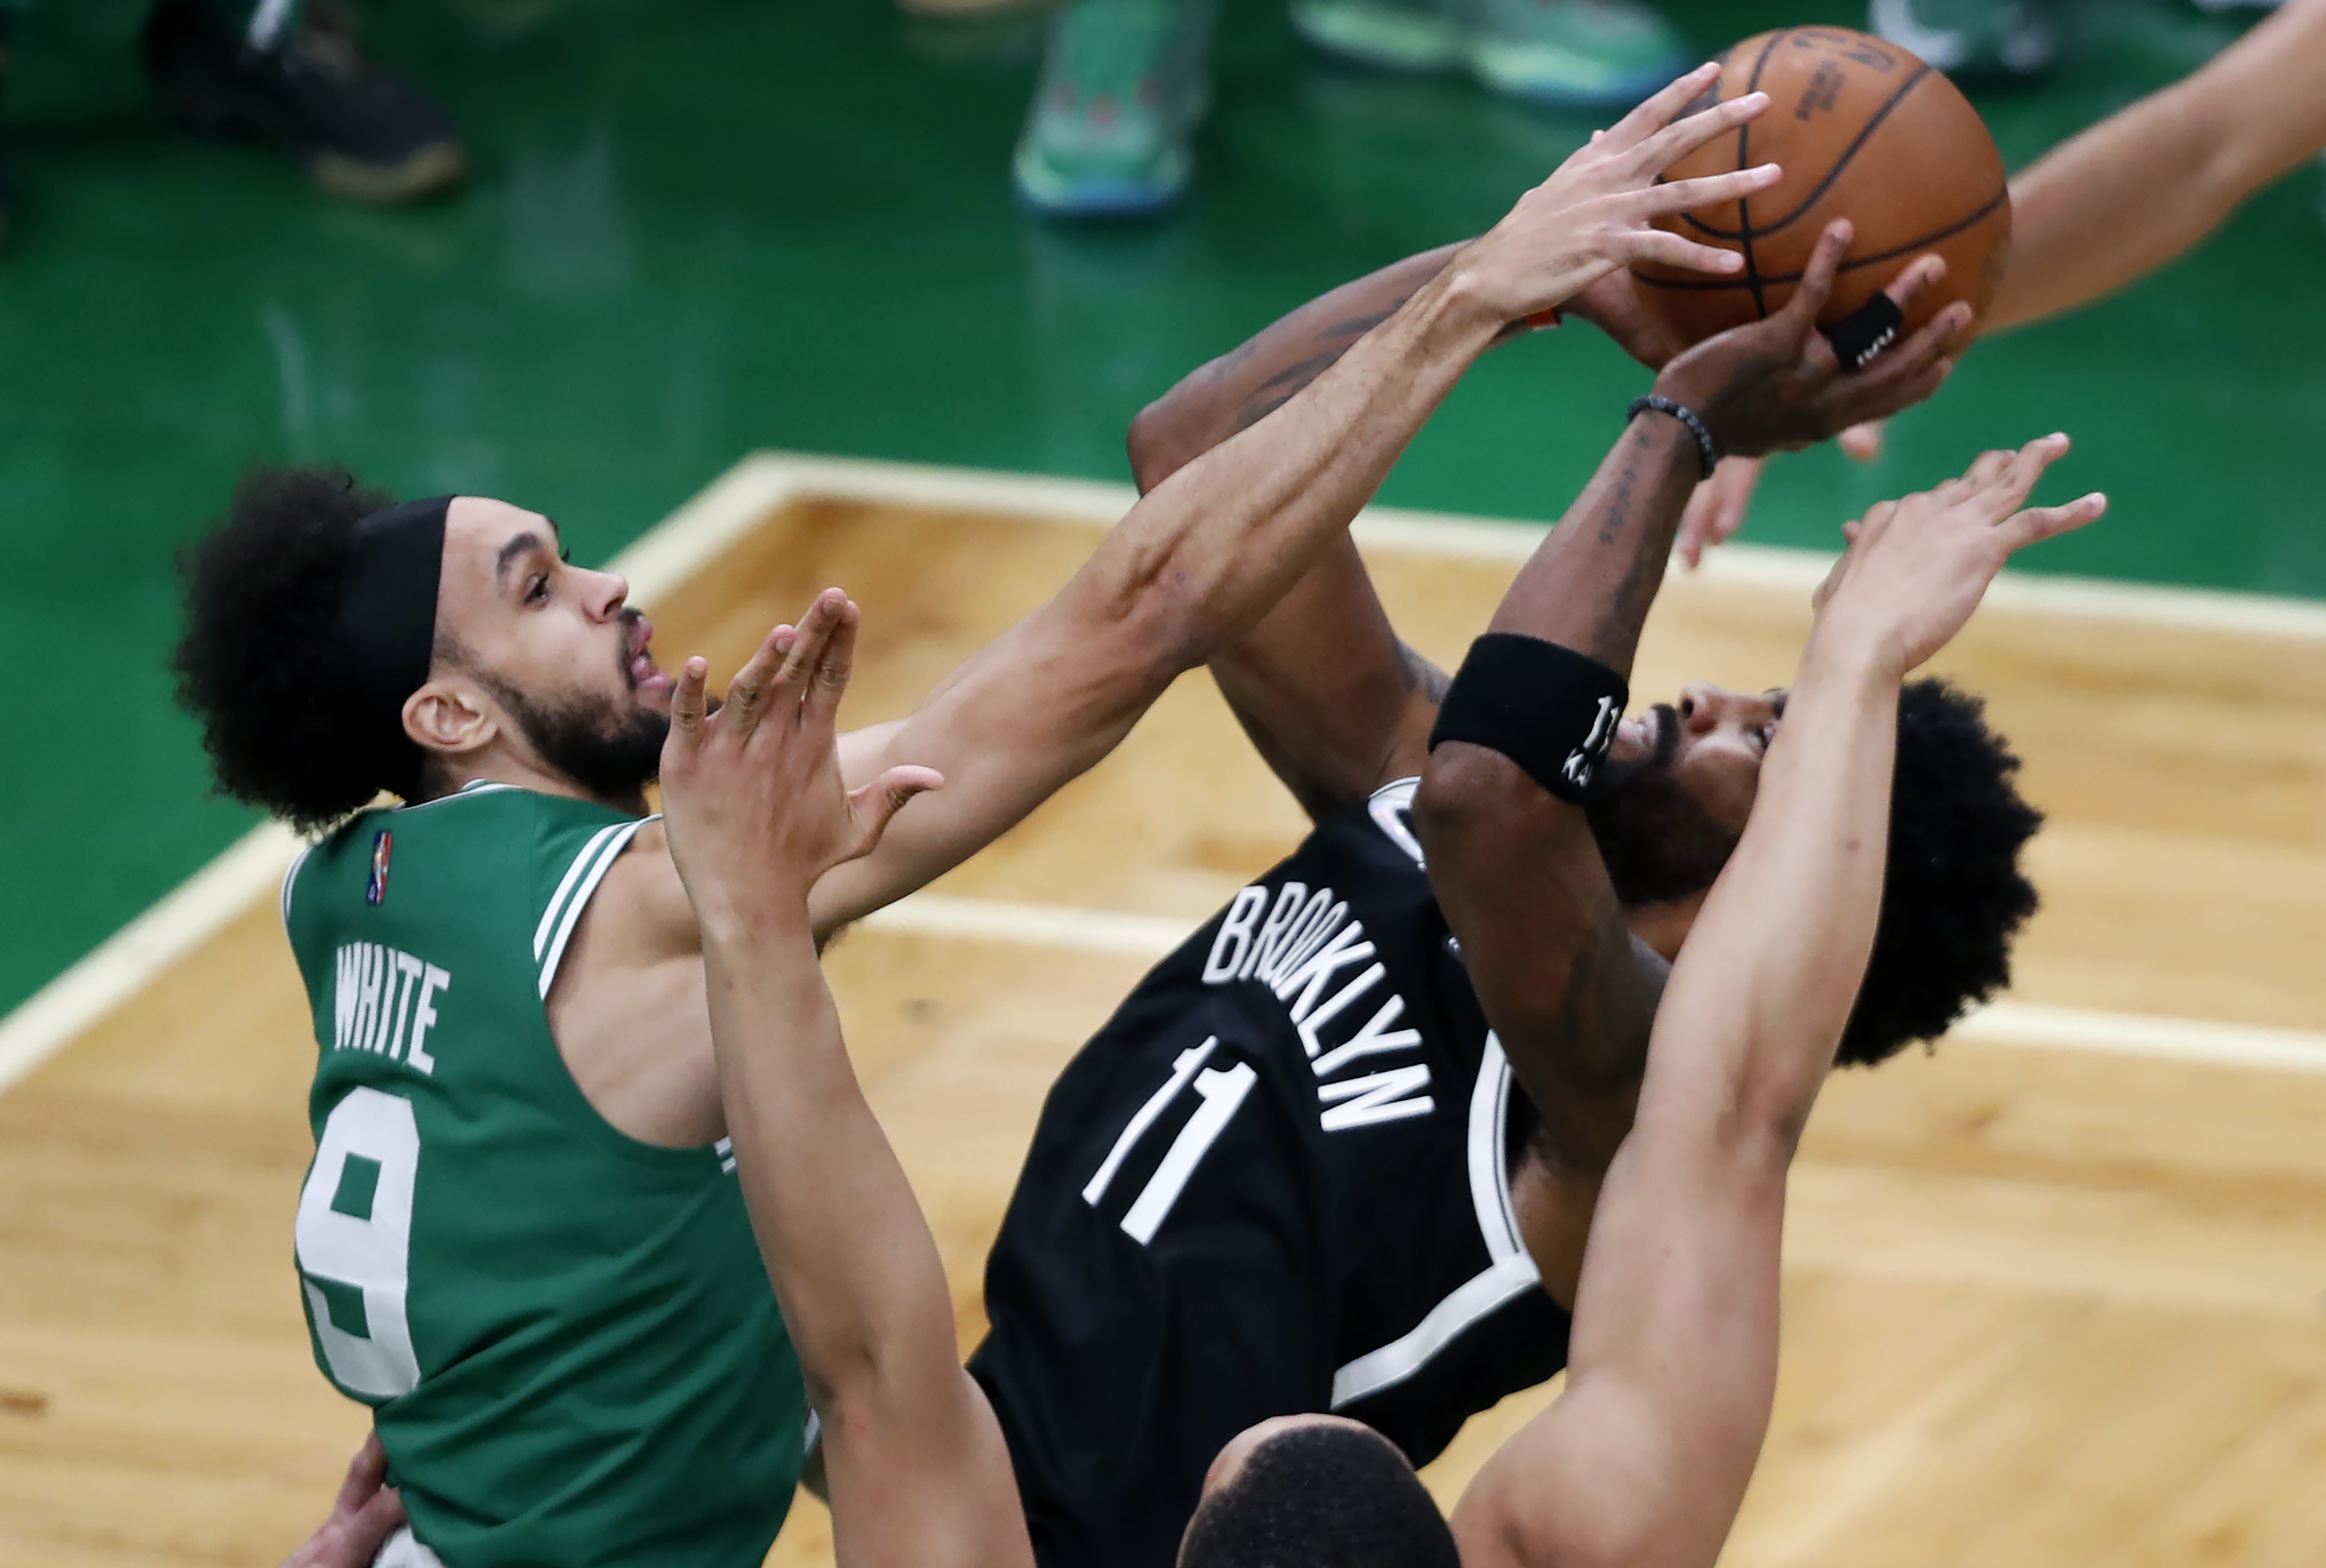 Kyrie sucks!': Celtics fans remind Kyrie Irving he's not welcome in Boston  amid Nets blowout